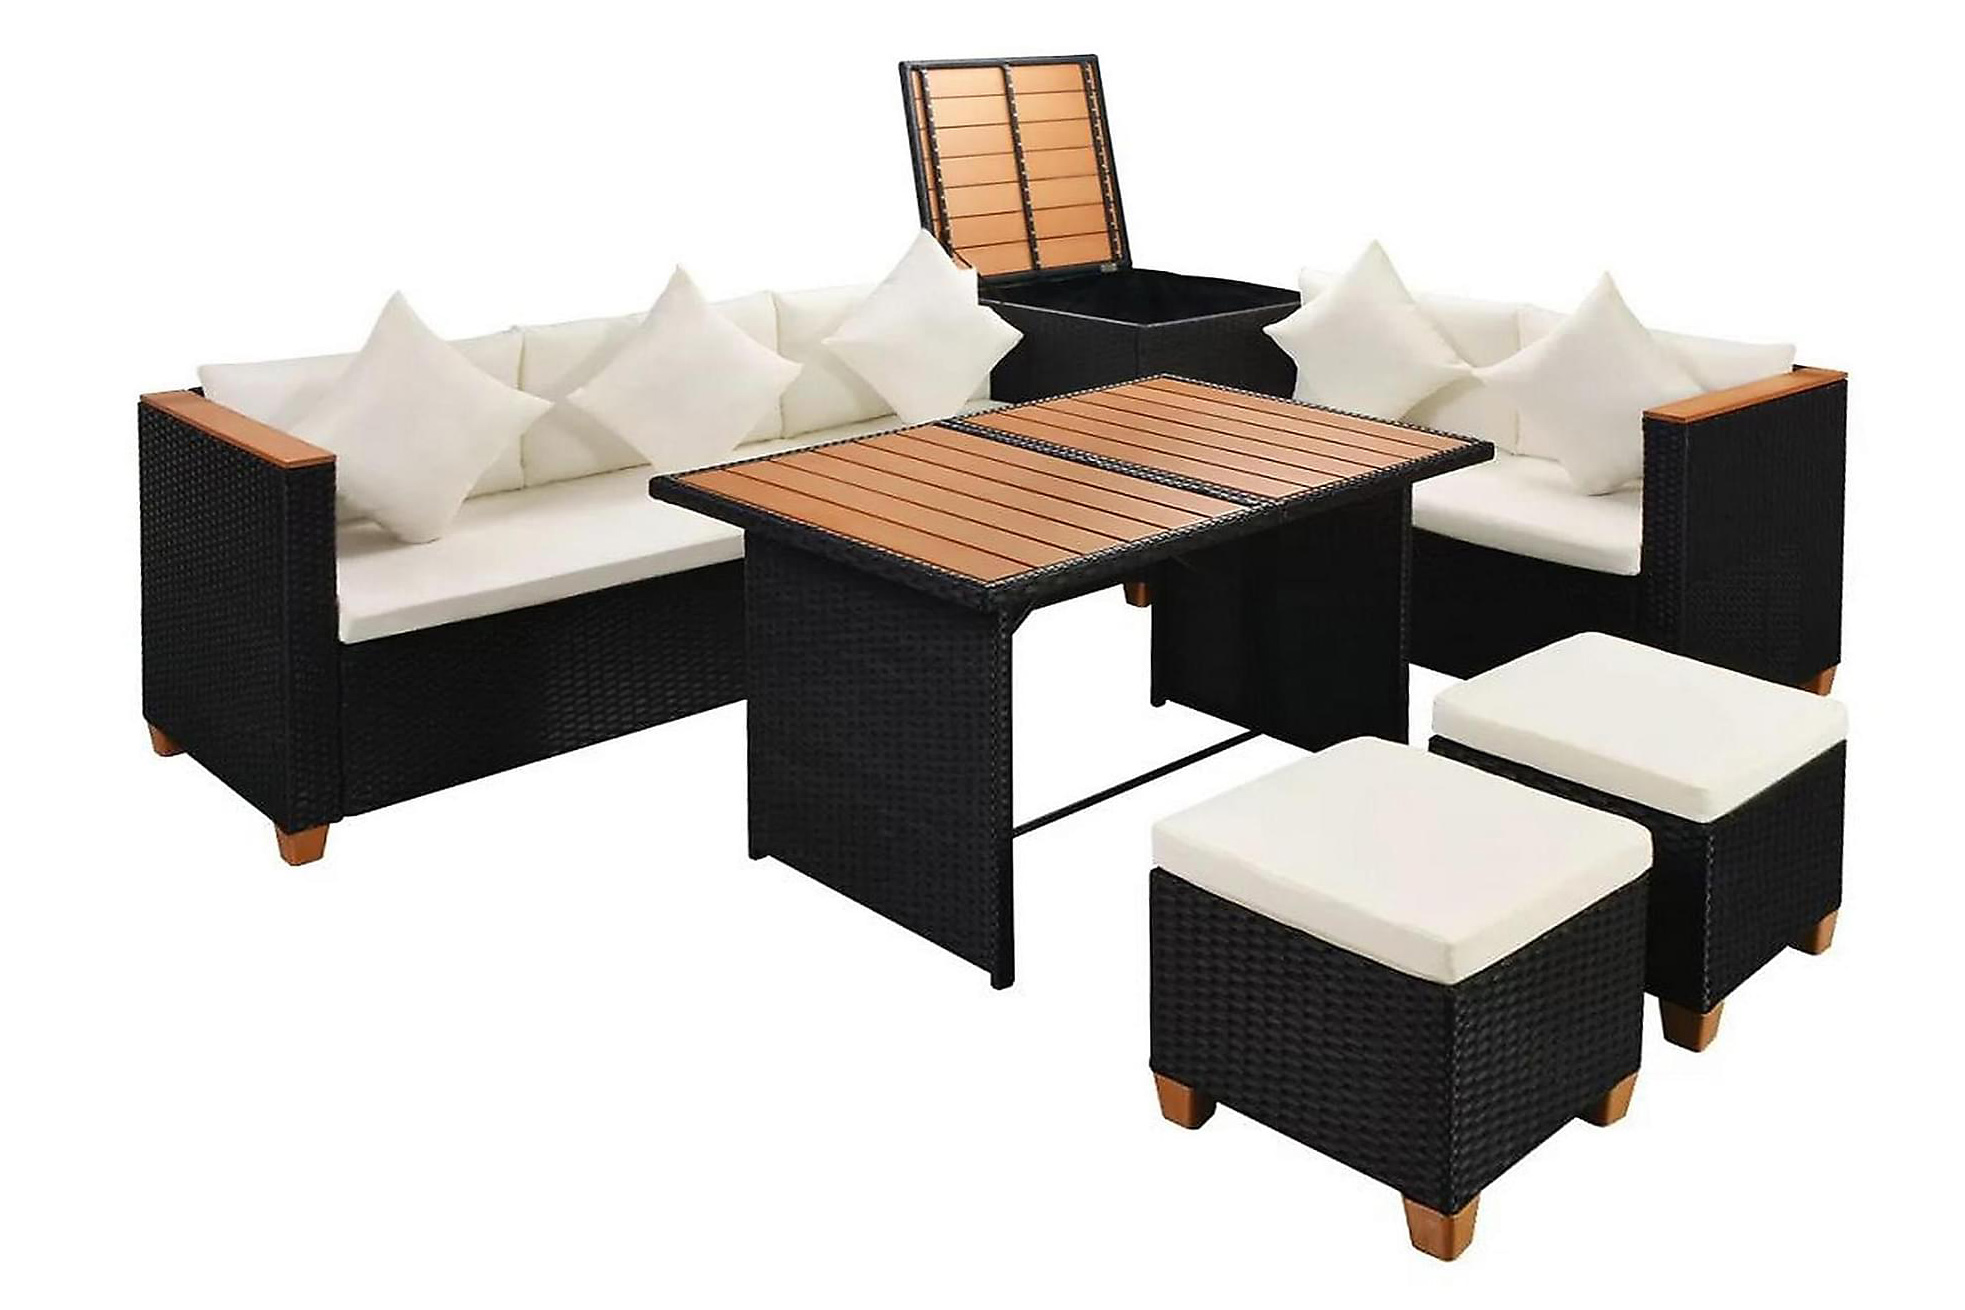 （KD）Rattan Garden Furniture Table Sets Outdoor Indoor Cover Free Dining Party Black